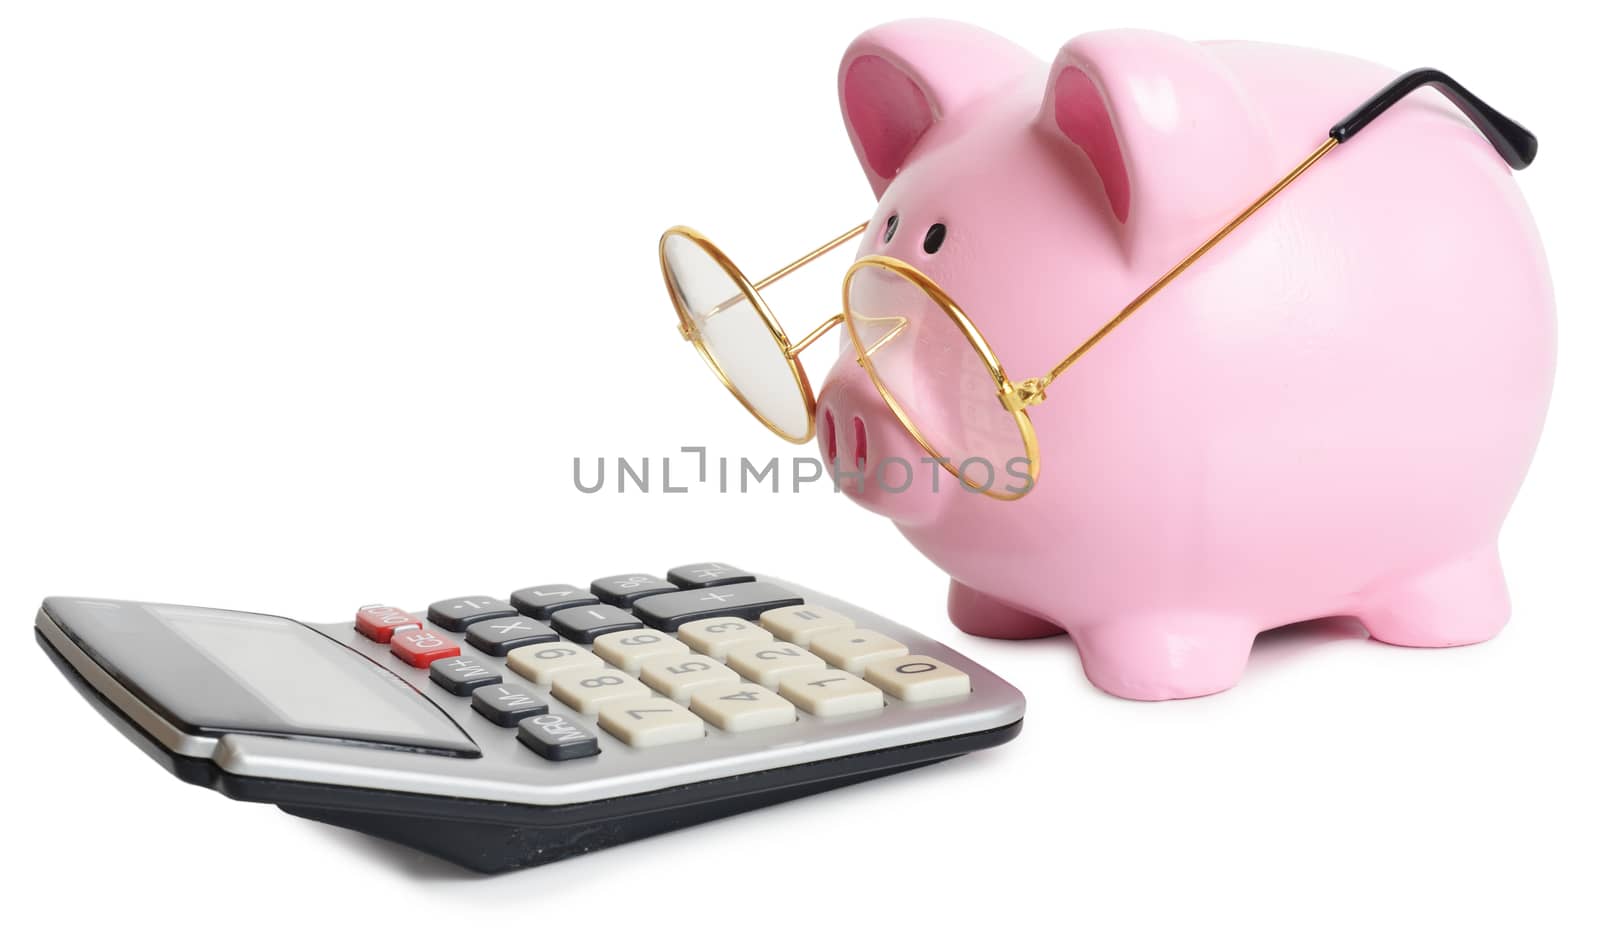 Piggybank and calculator by hyrons